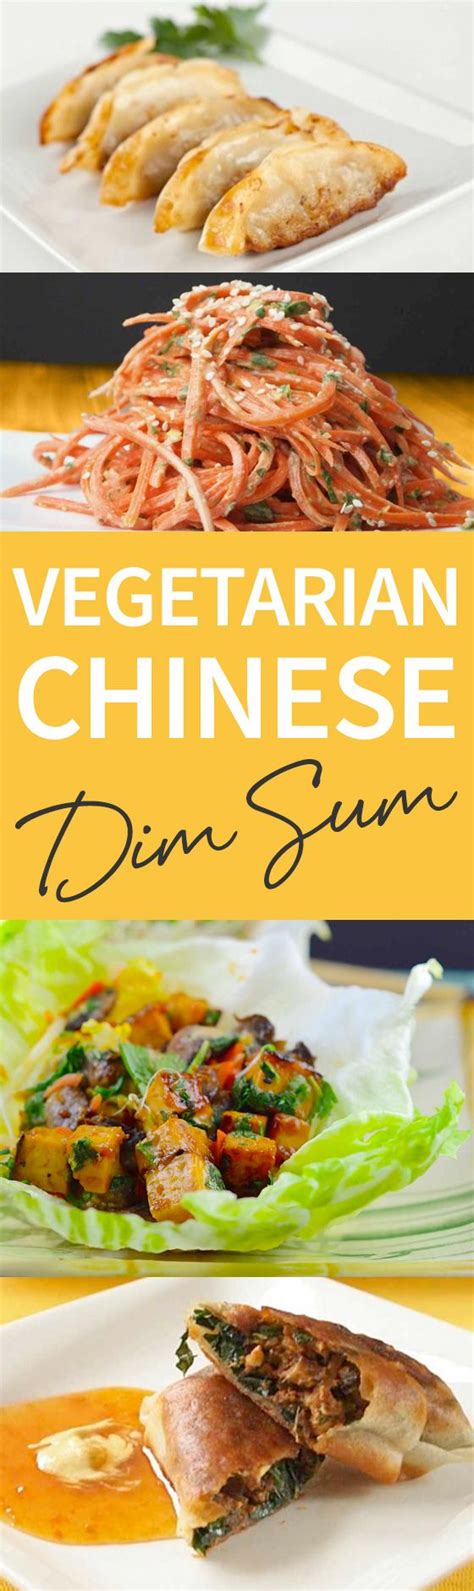 For english subtitles, click the captions button in the right corner of the video (2nd button. Vegetarian Chinese Dim Sum | Vegetarian dim sum, Vegetarian, Vegetarian recipes